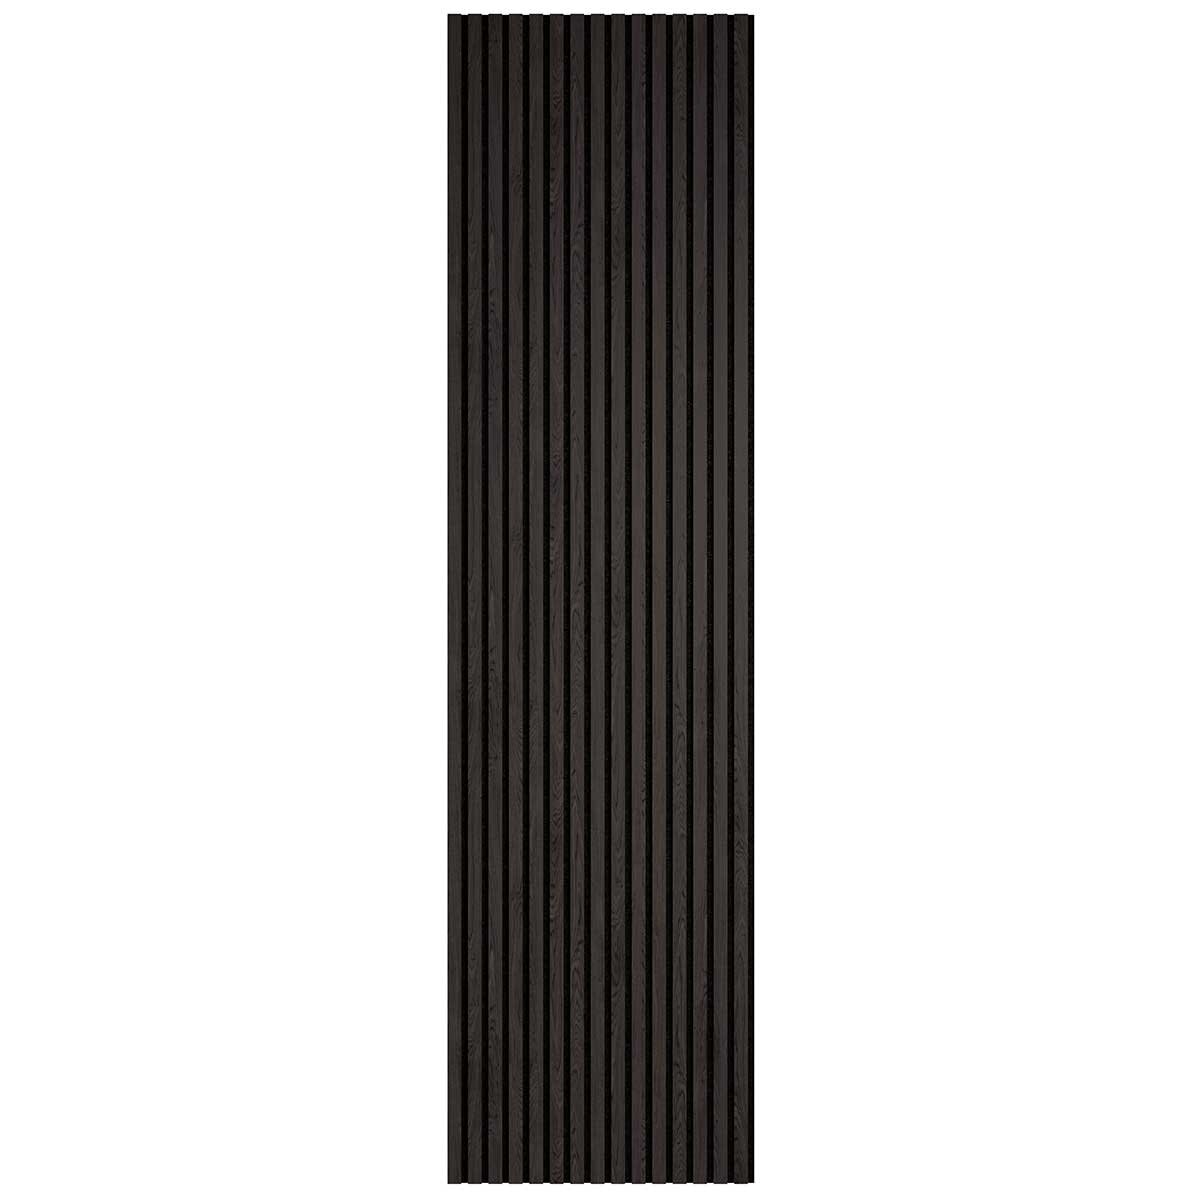 Graphite Decorative Slated Wood Wall Panel in 2 Sizes (2 panels per pack)